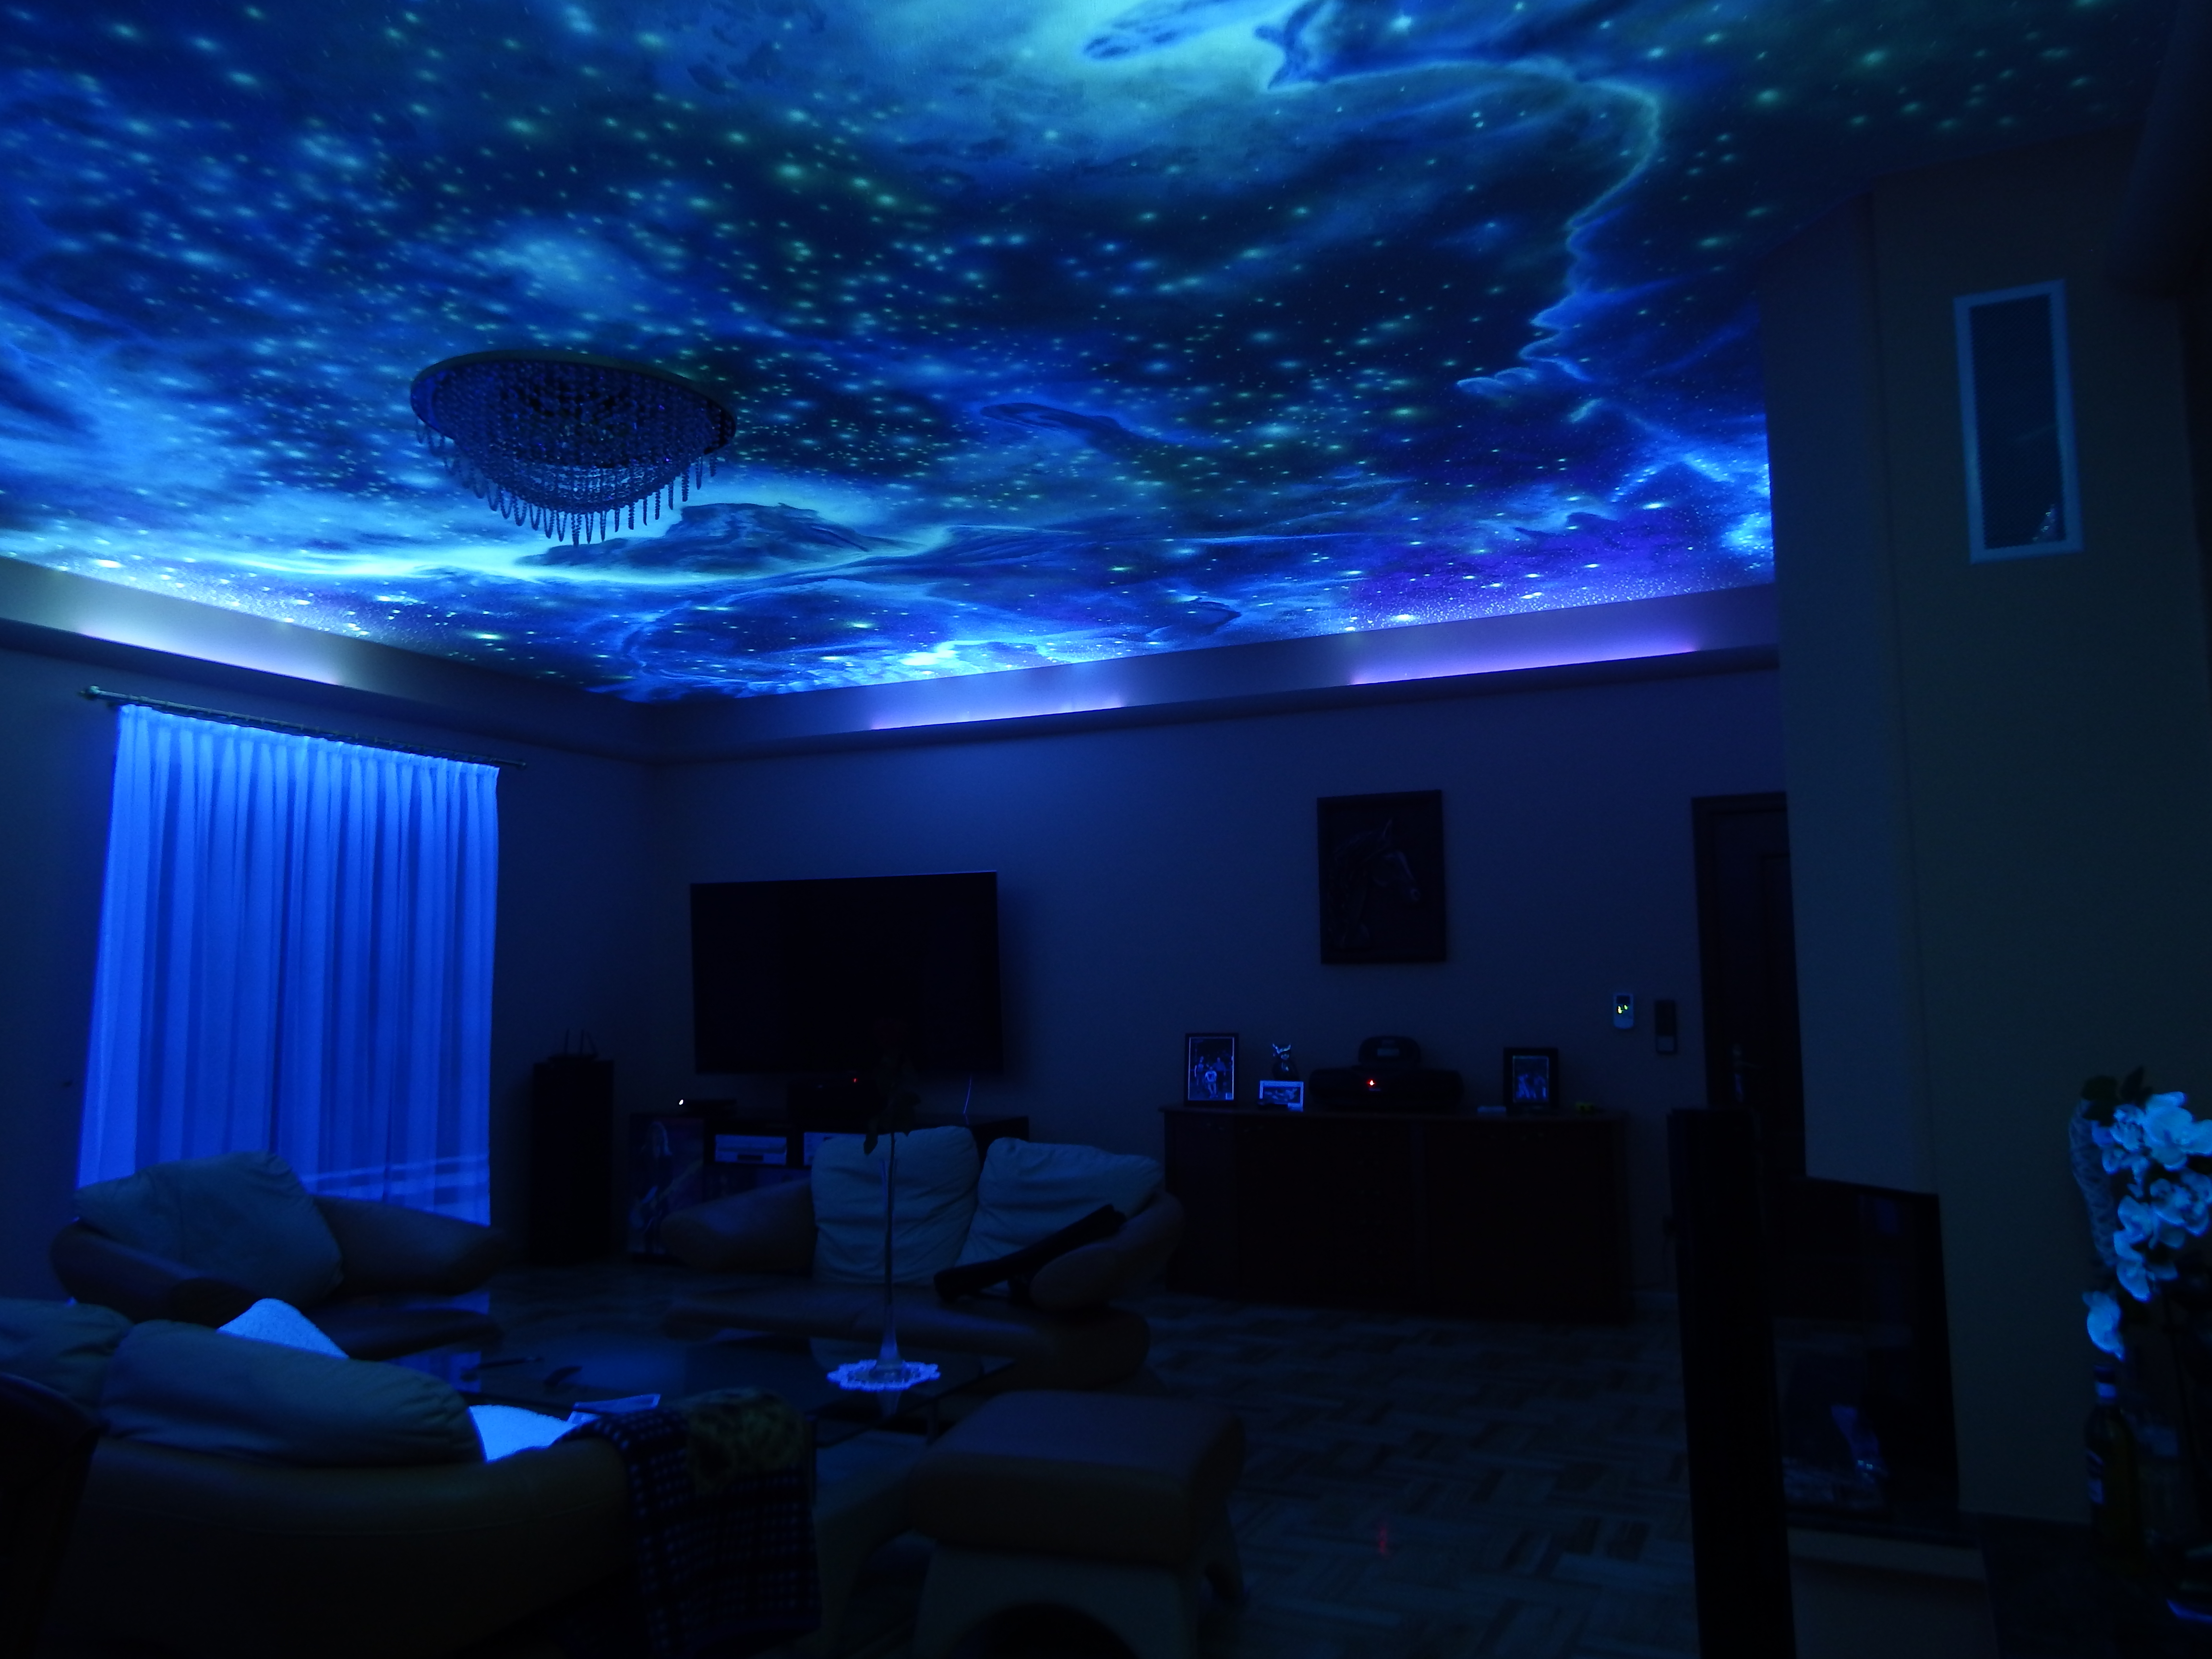 Painting with UV paints - Starry sky in the living room